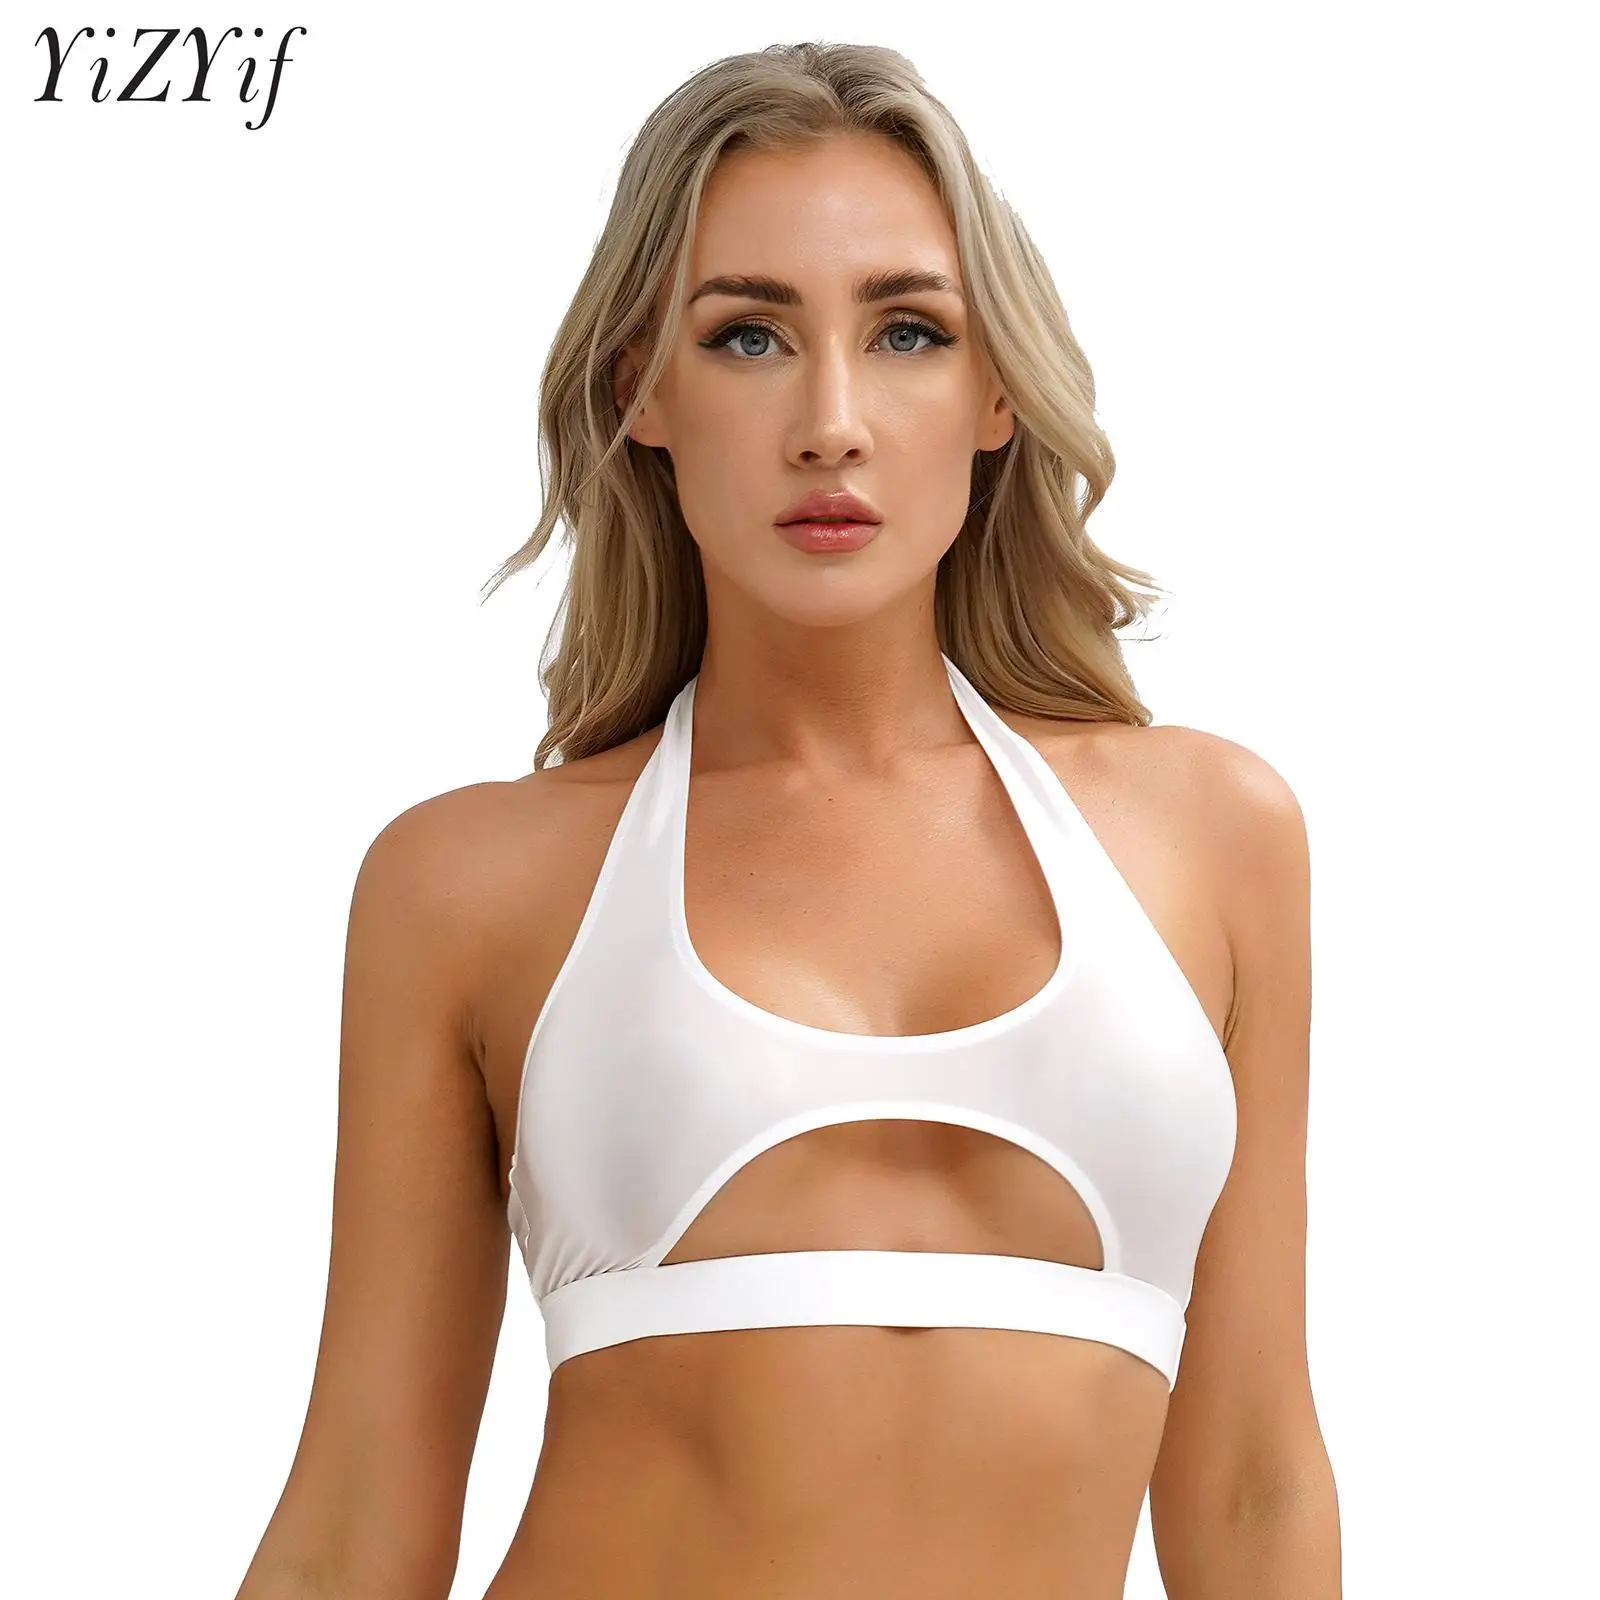 

Women's Glossy Halter Crop Tank Tops Solid Color Cut Out Sport Bra Gym Workout Fitness Stretchy Vest Pool Party Rave Clubwear